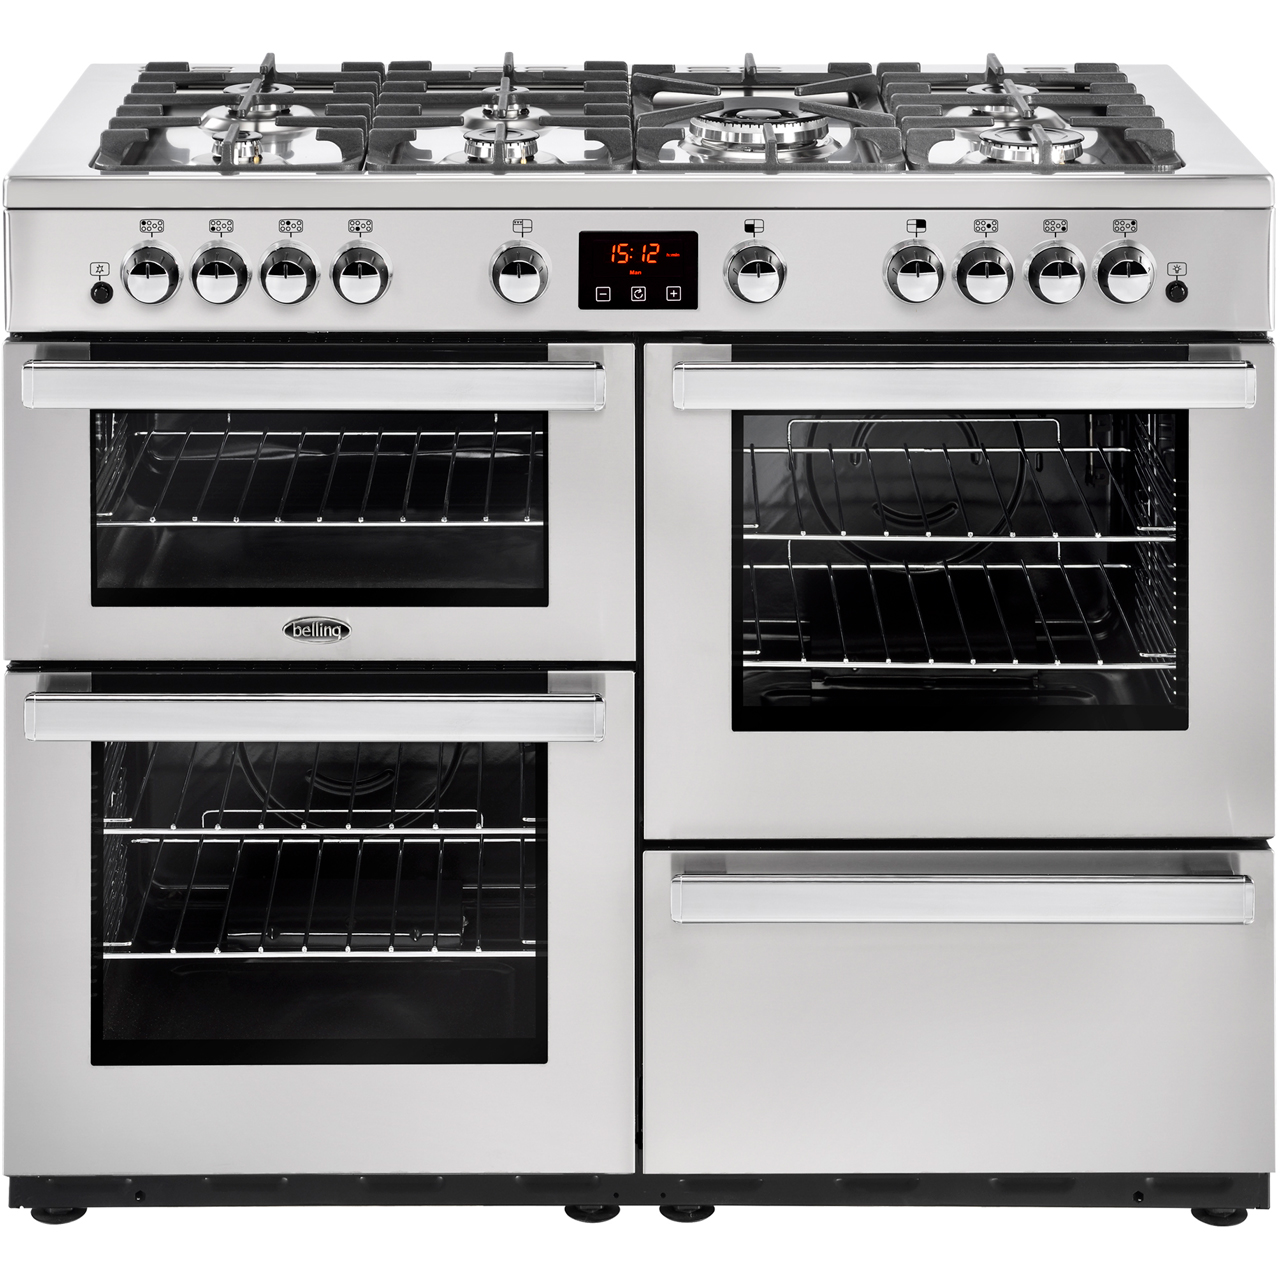 Belling Cookcentre110G Prof 110cm Gas Range Cooker Review